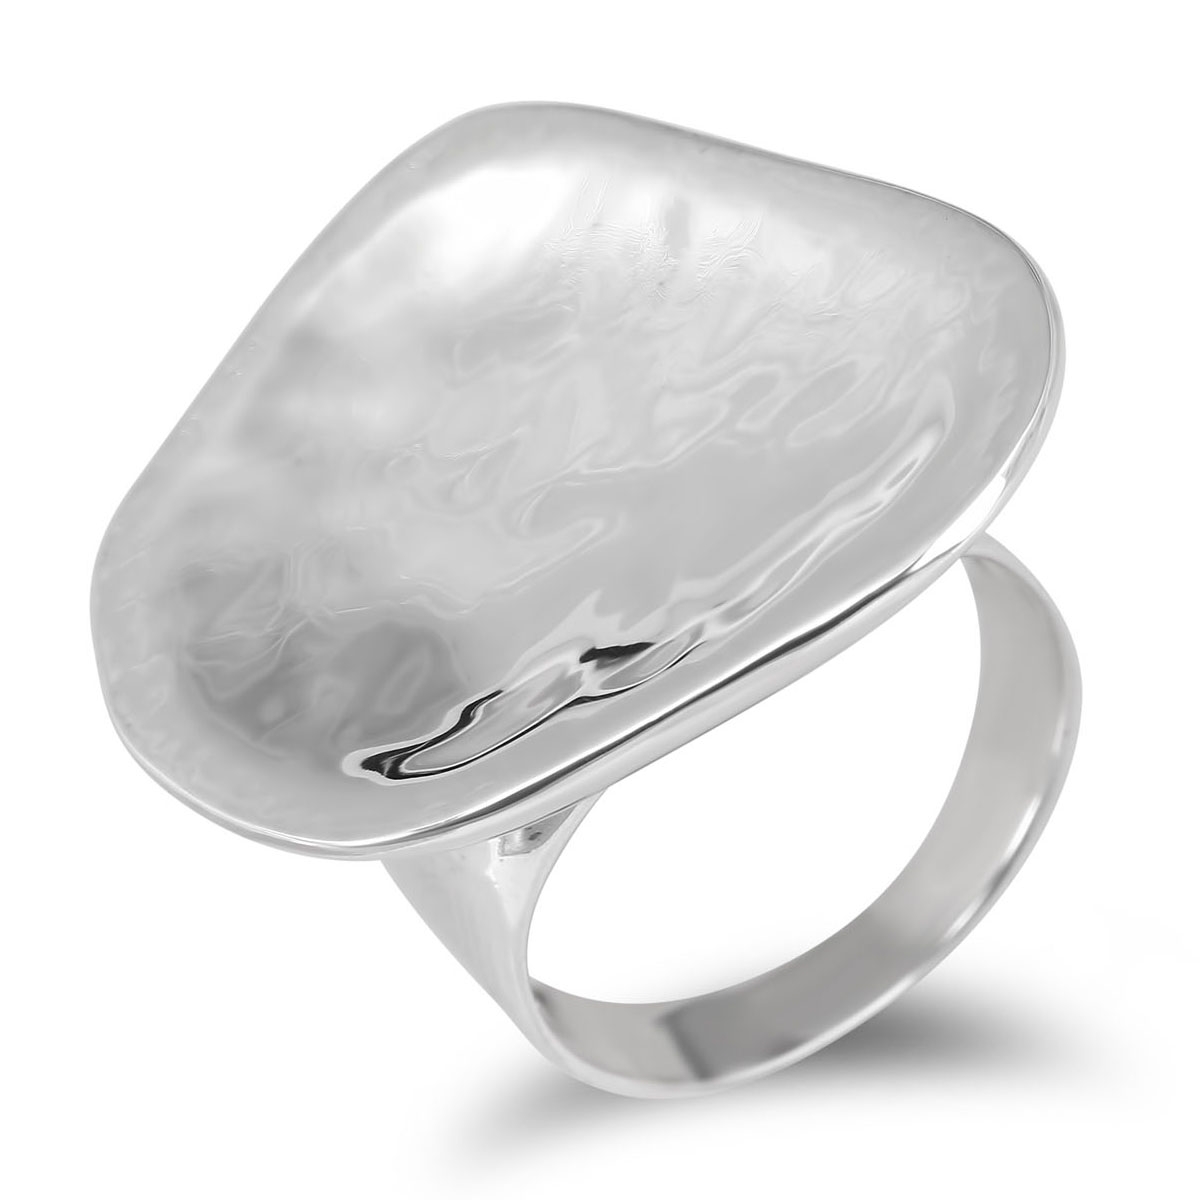 Moriah Jewelry Chunky Indented Sterling Silver Ring  - 1